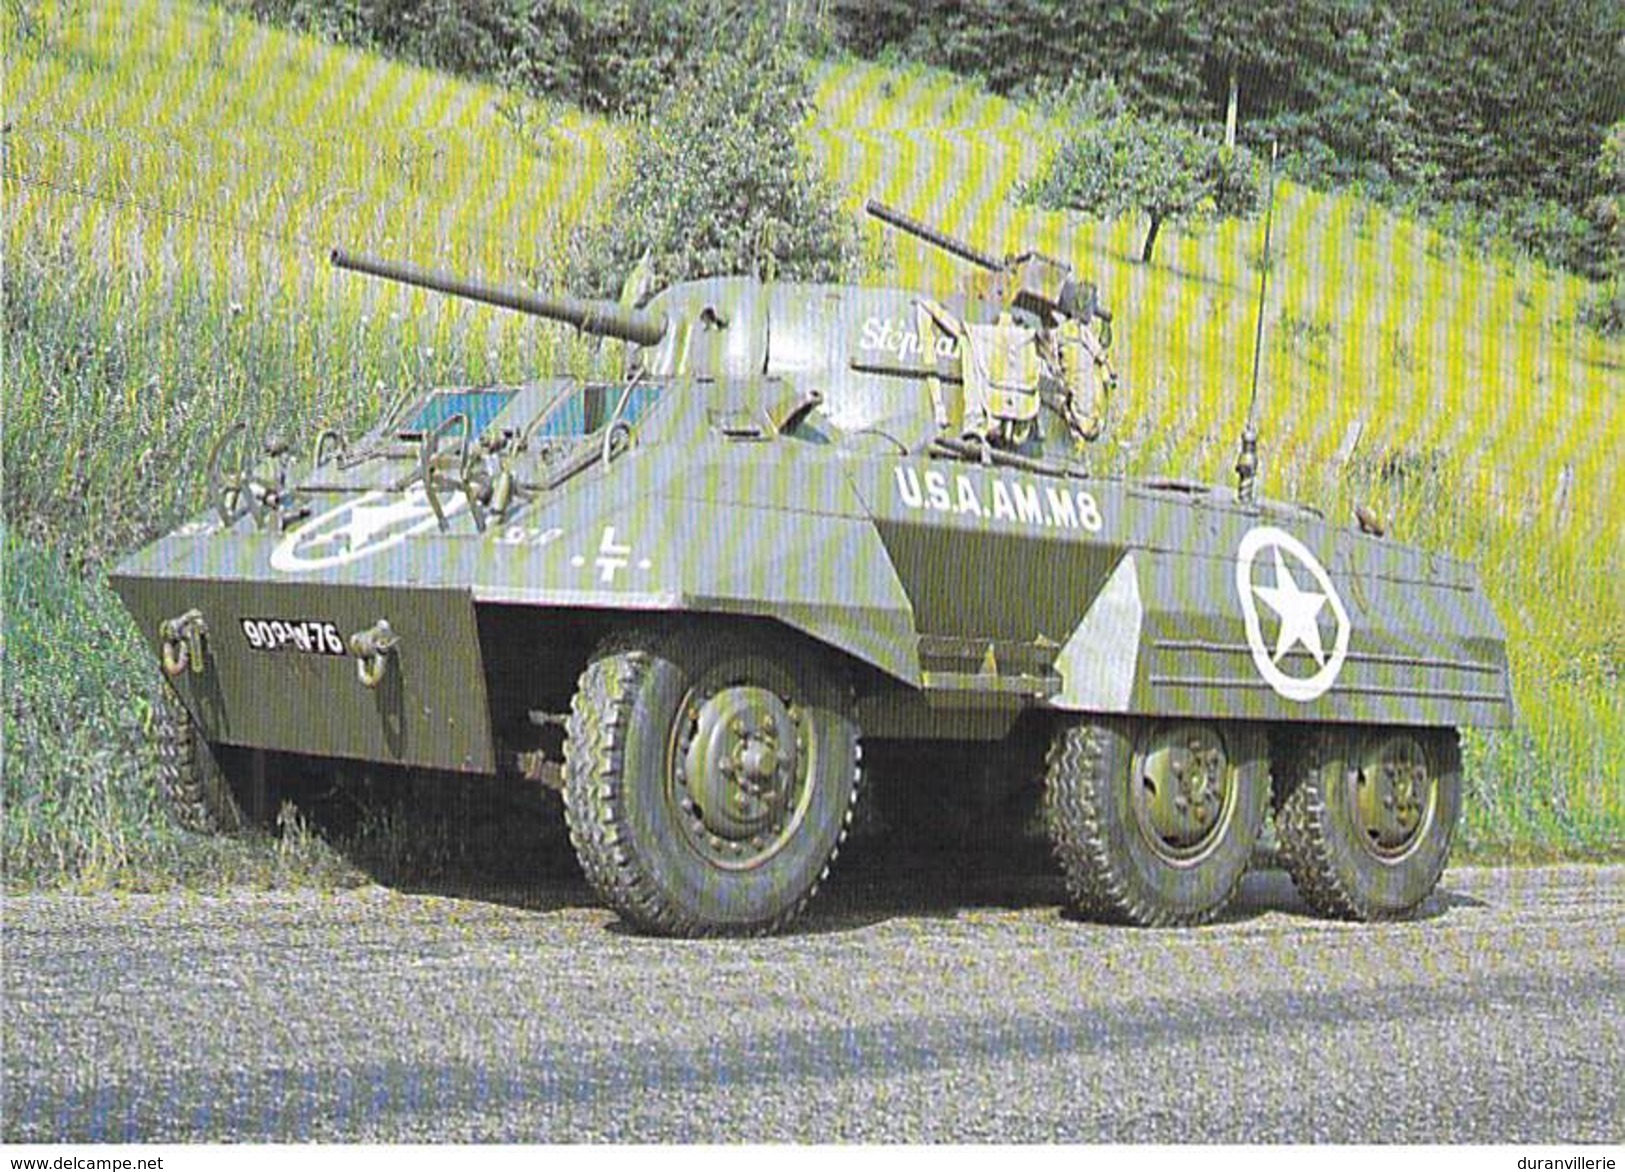 76 - CLERES - Militaria Musée Automobile Militaire - Greyhound AM M8 Ford 1942 - Clères